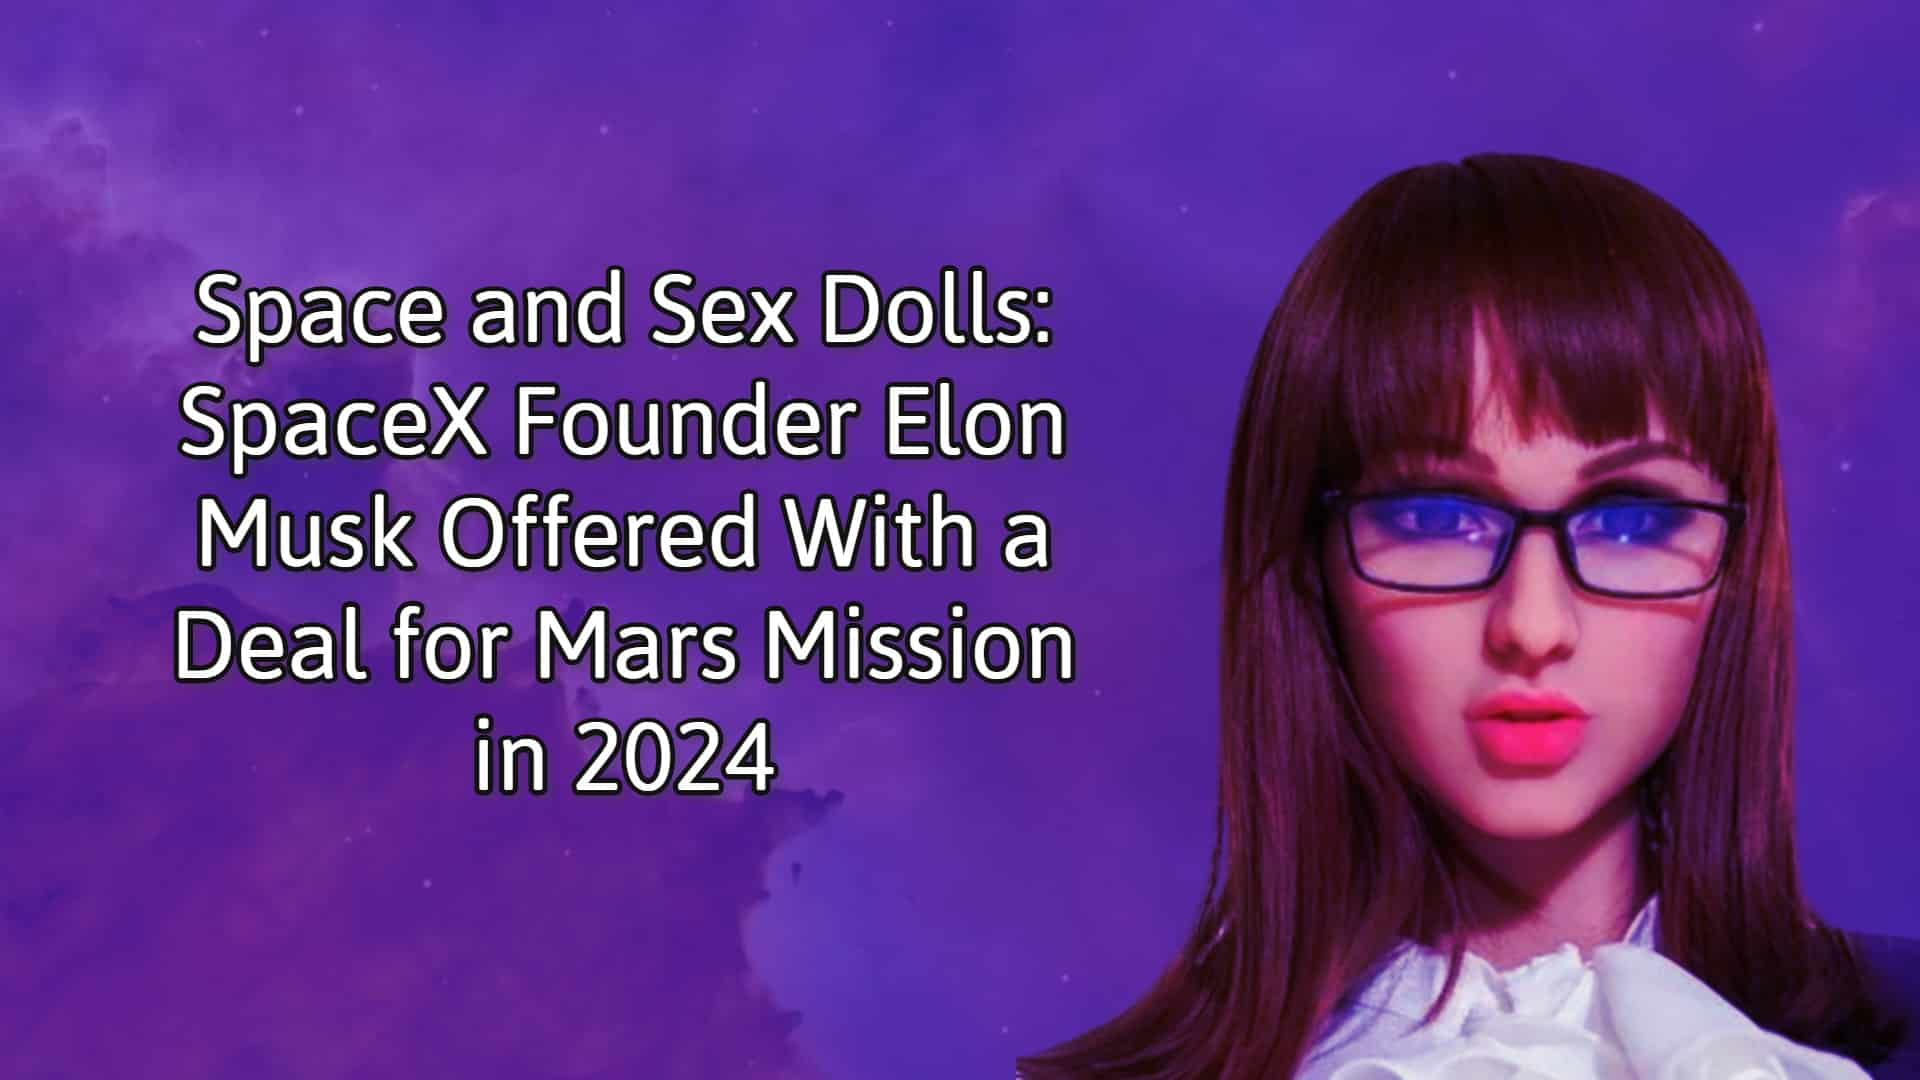 Space and Sex Dolls: SpaceX Founder Elon Musk Offered With a Deal for Mars Mission in 2024